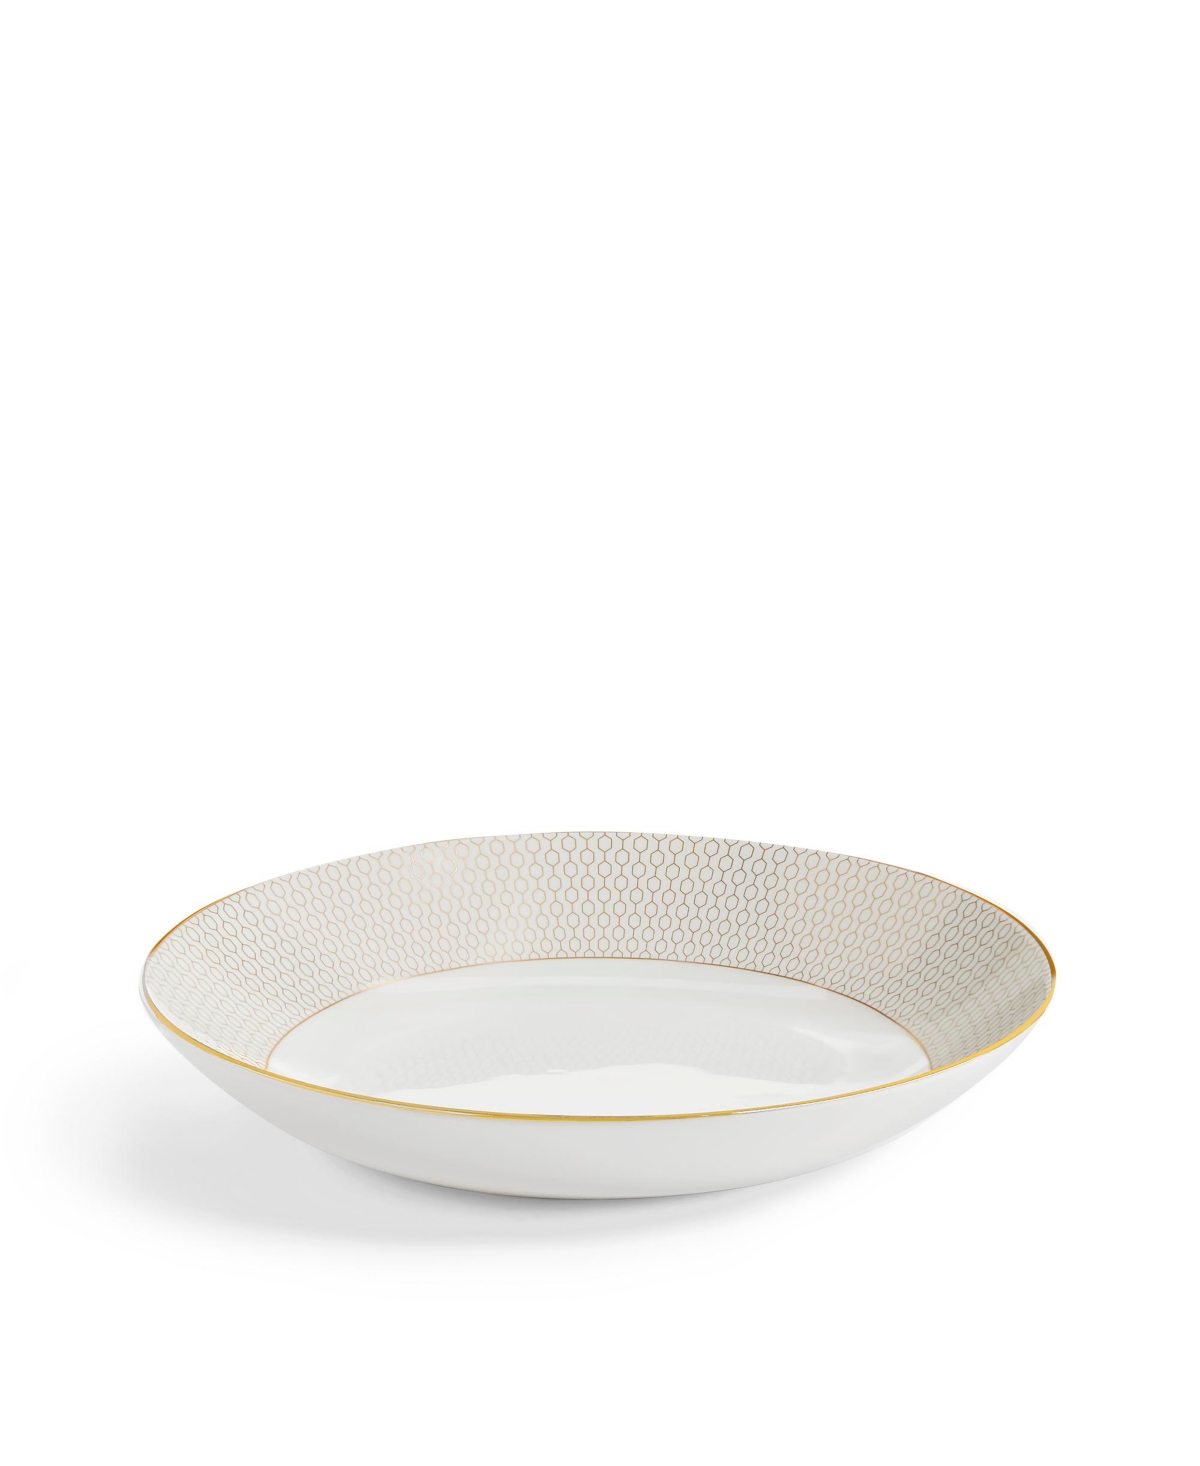 Wedgwood Gio Gold Pasta Bowl, 9.4" In Multi